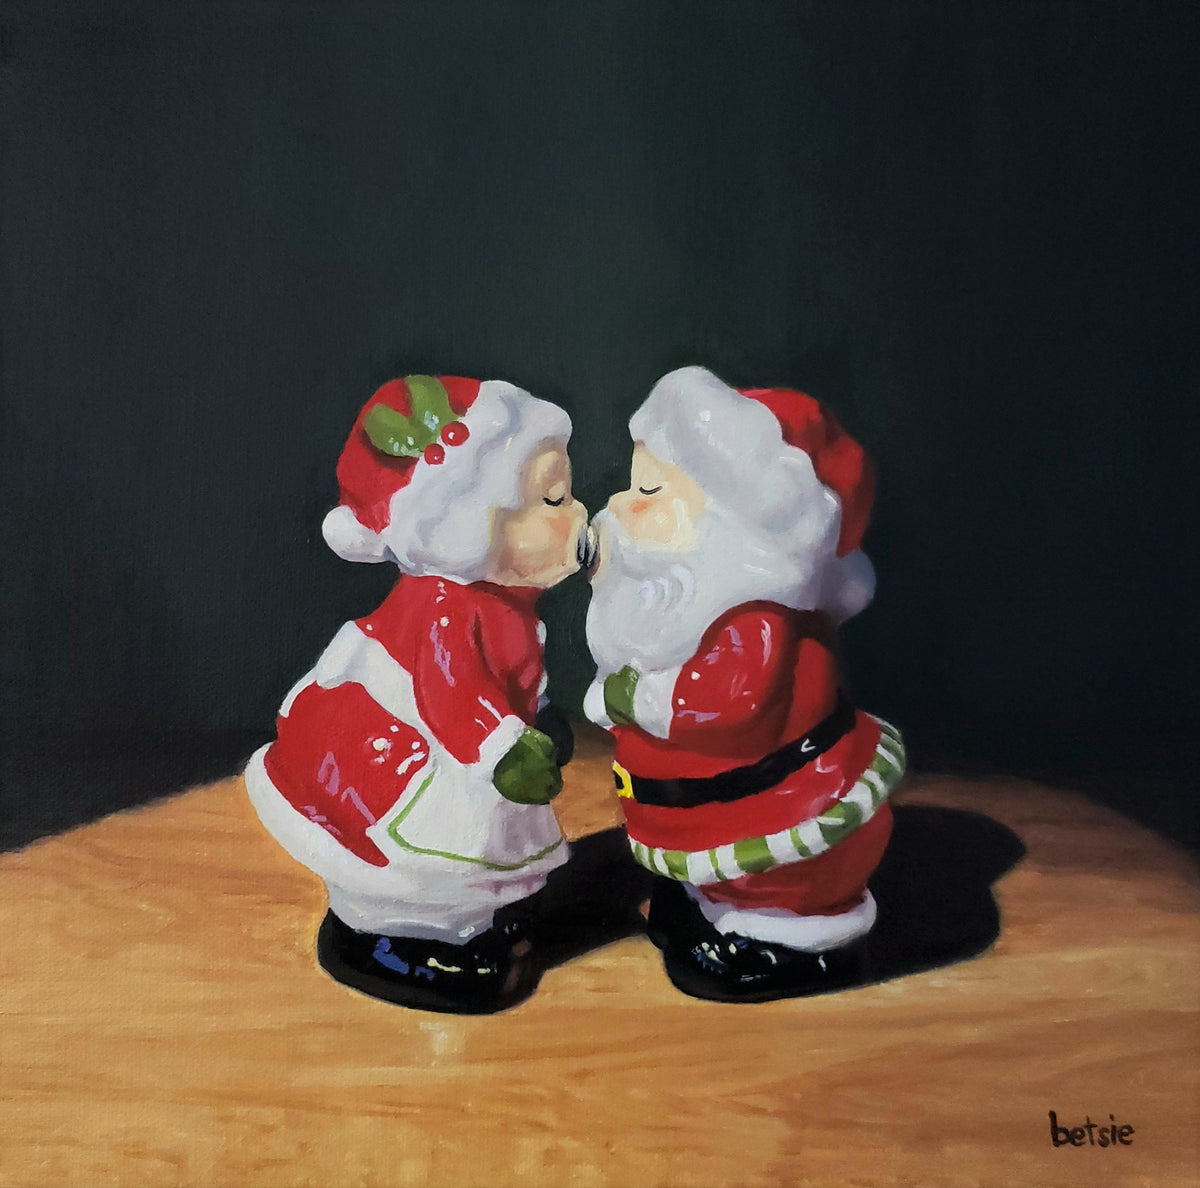 Shakin' It with Mr. & Mrs. Claus (Giclée Print)